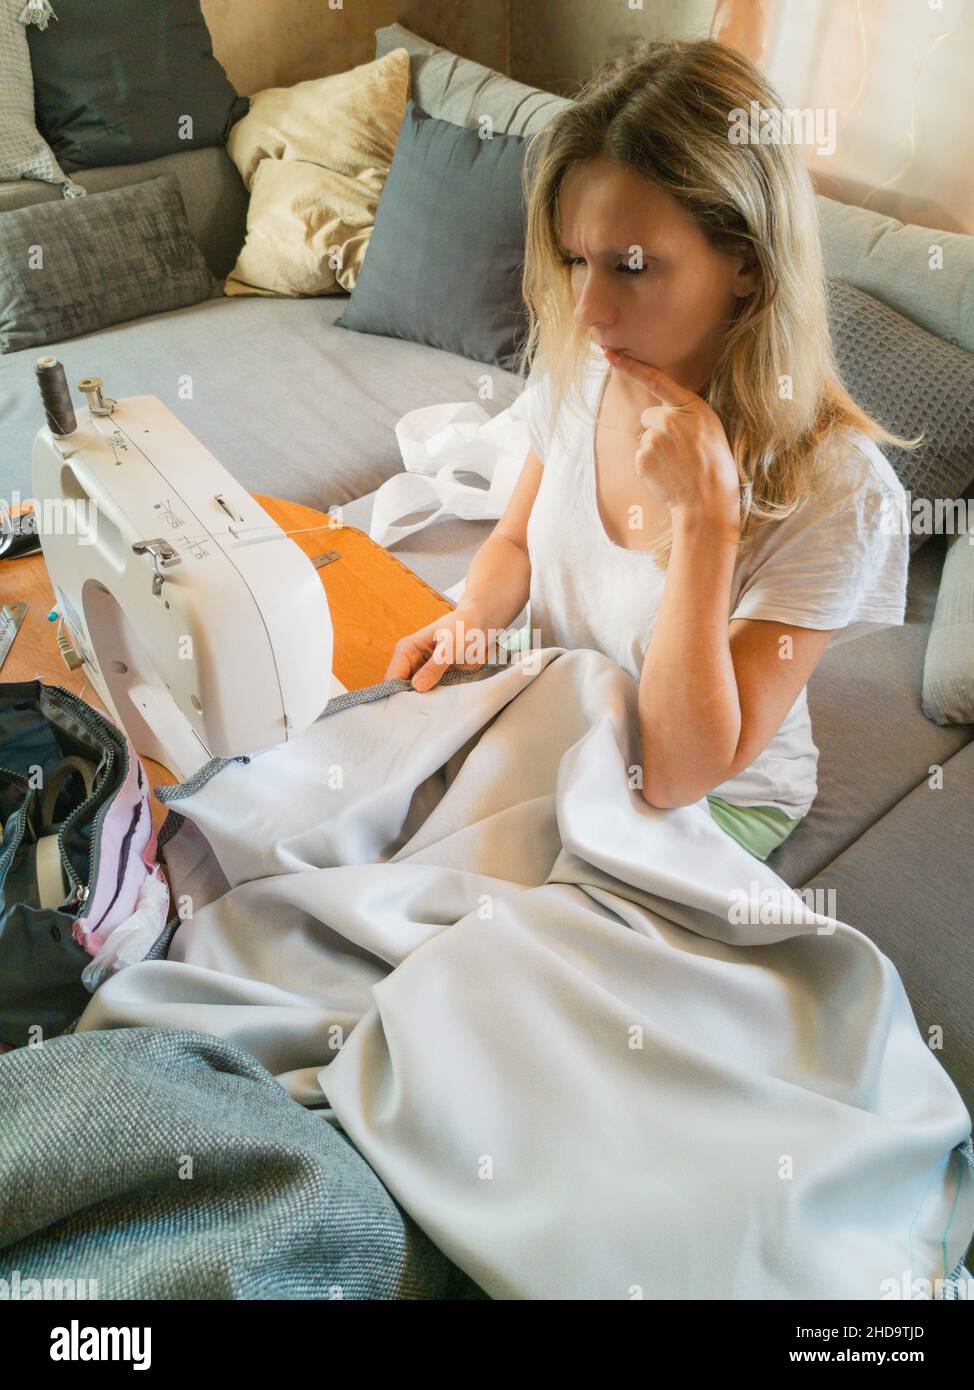 A beautiful, smiling young girl sewing on a sewing machine Stock Photo